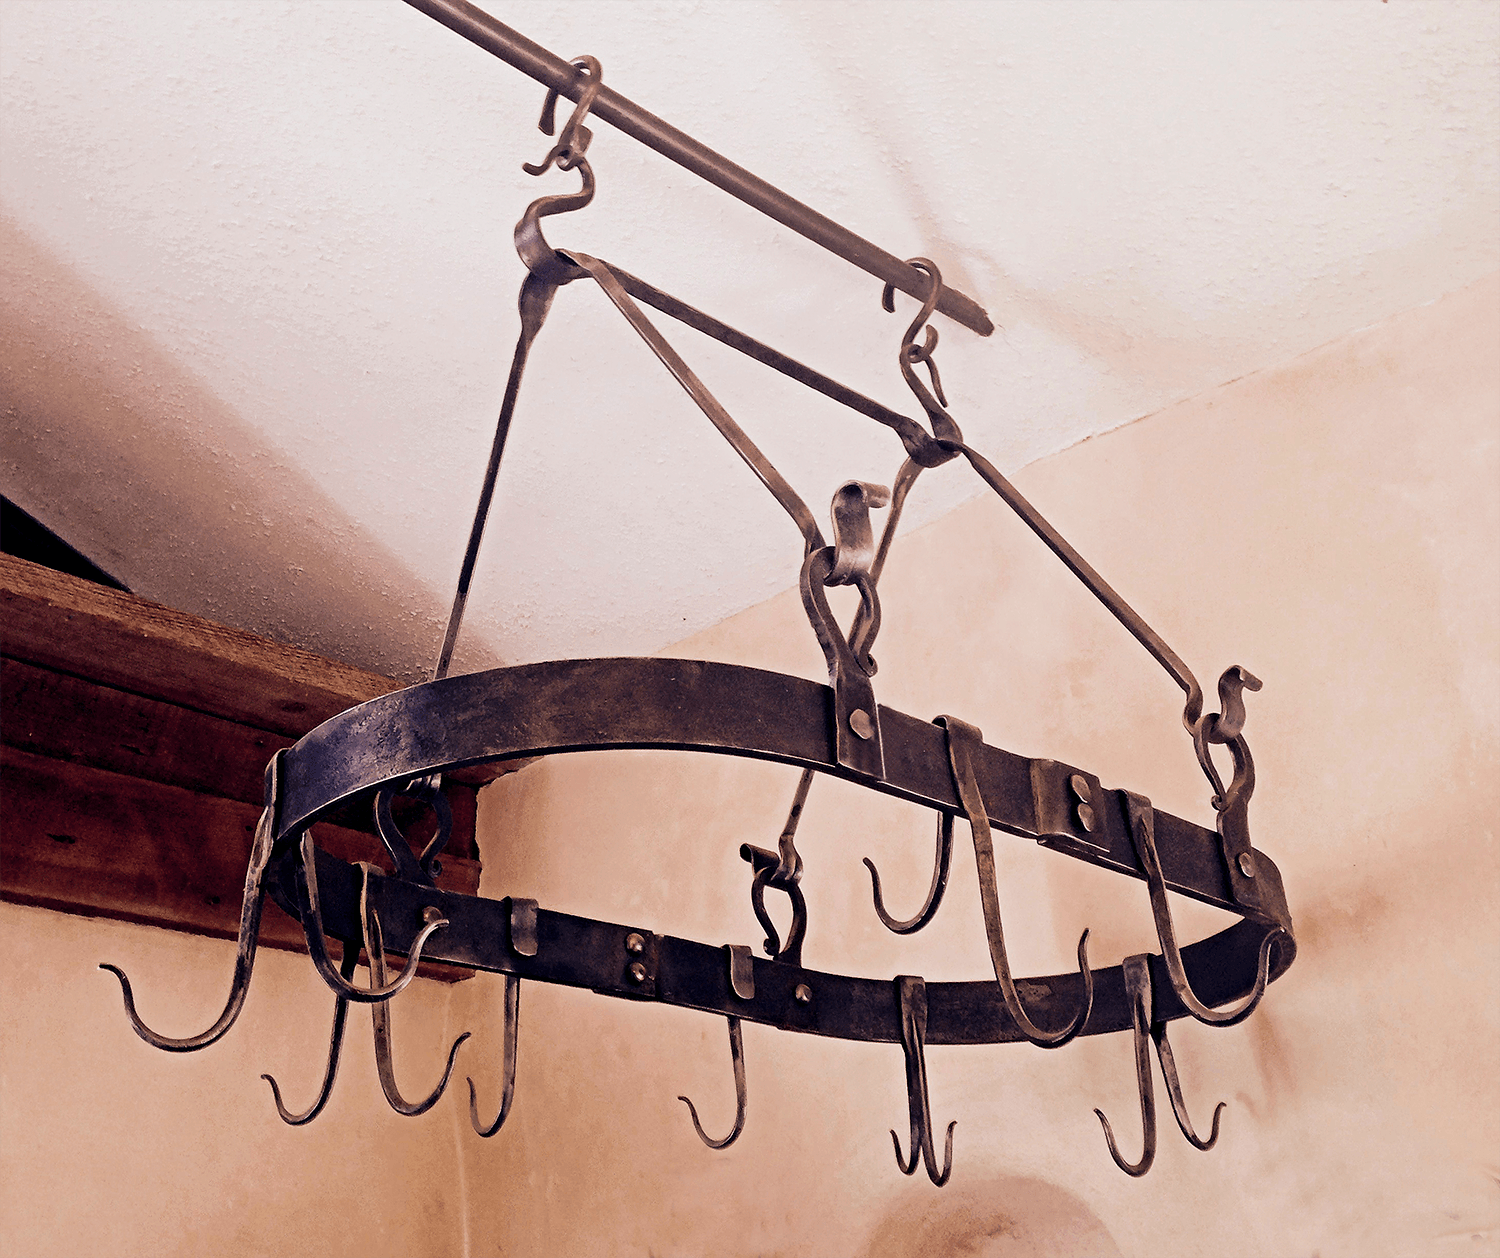 Rustic wrought iron Kitchen Pot Rack hand forged by Santa Fe blacksmith, Christopher Thomson Ironworks.